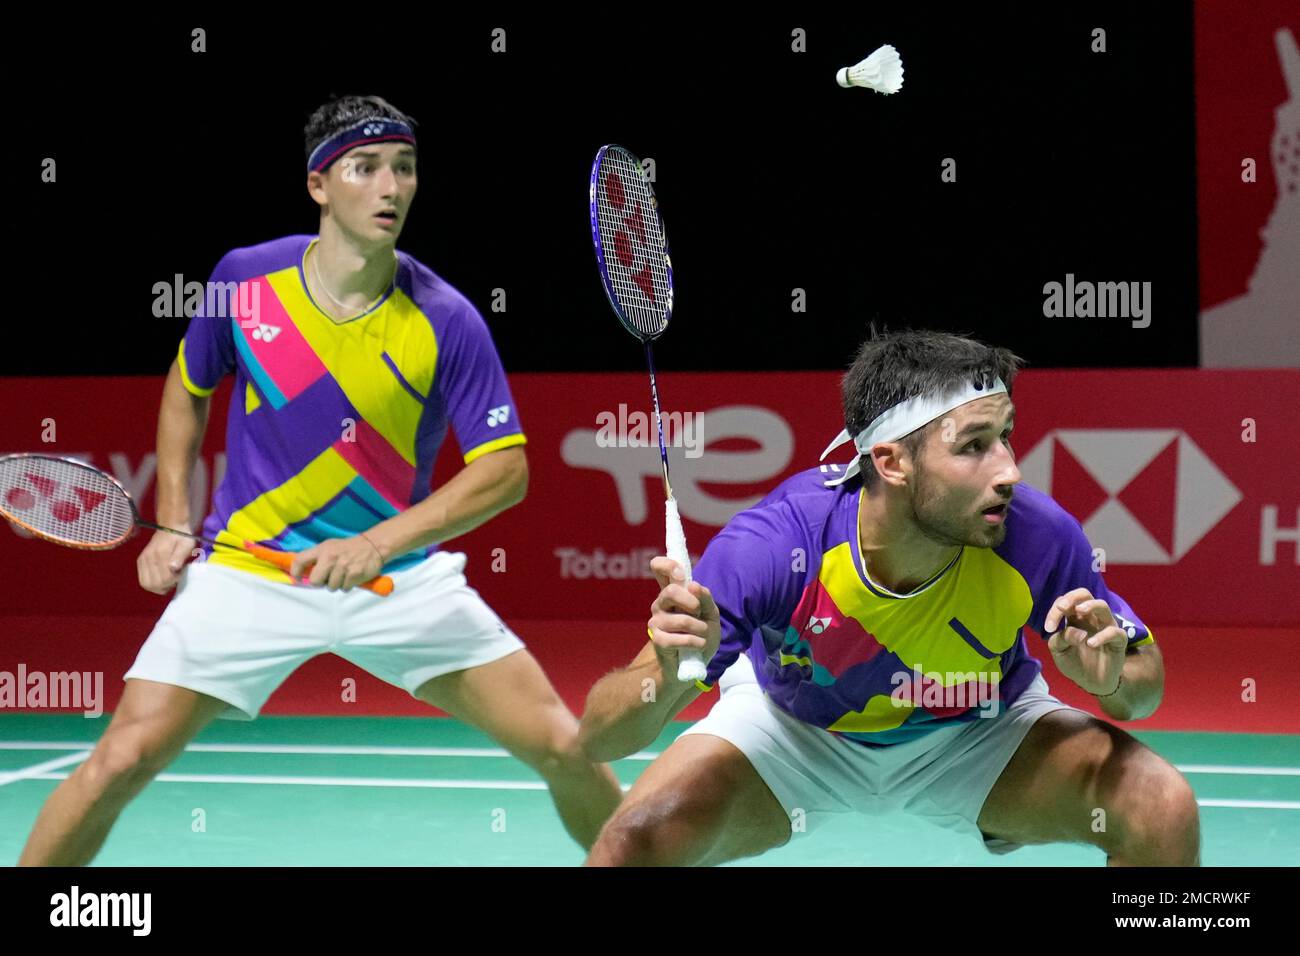 France Toma Junior Popov, right, and Christo Popov compete against Malaysias Ong Yew Sin and Teo Ee Yi during their mens doubles Group B badminton match at the BWF World Tour Finals